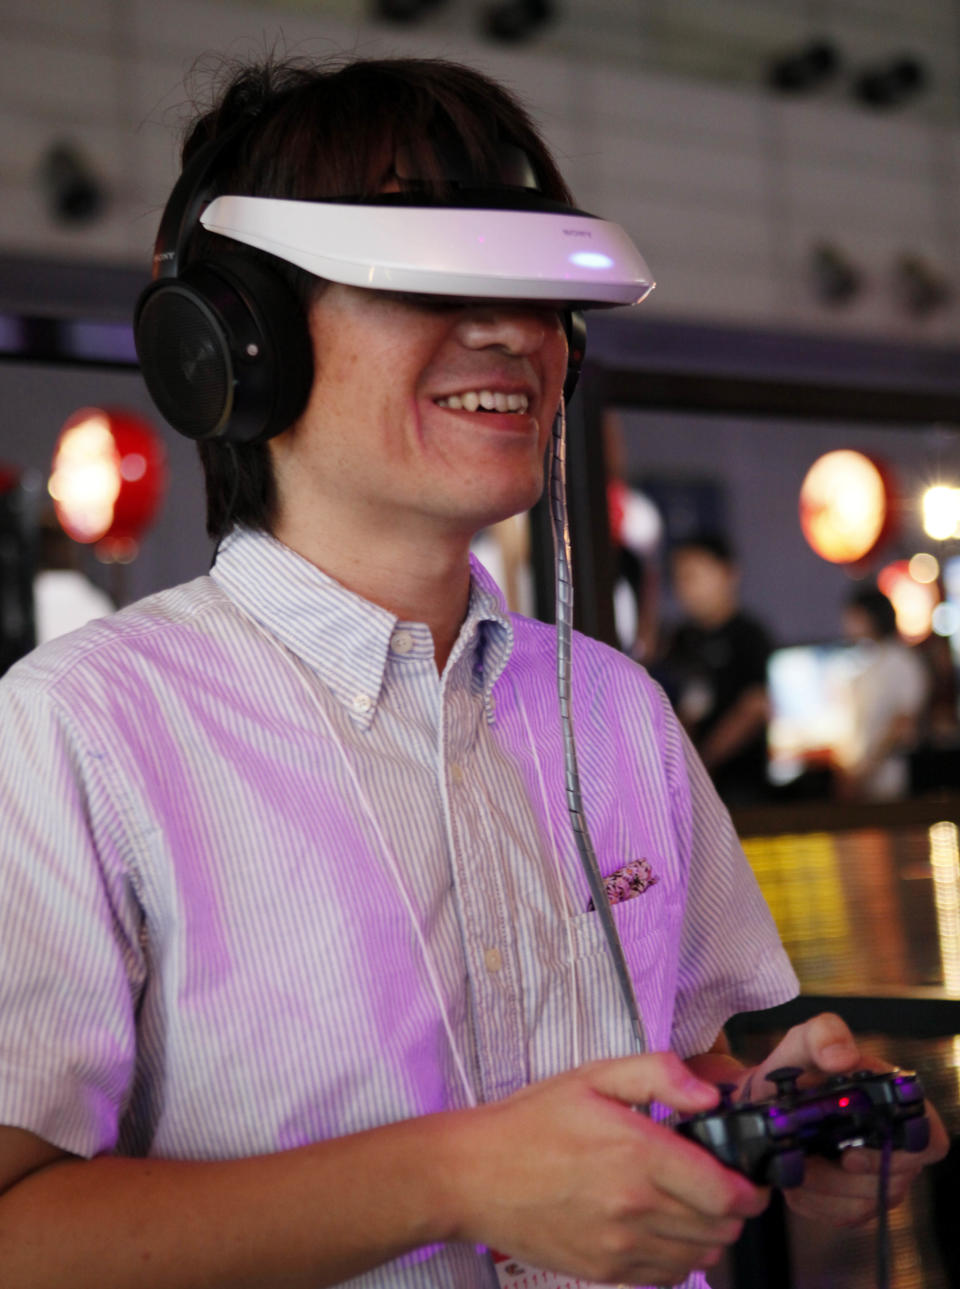 A visitor demonstrates Sony's head-mounted display HMZ personal 3D viewer, which provides a 3-D theater of music videos, movies and games, at the Tokyo Game Show in Makuhari, Chiba, near Tokyo,Thursday, Sept. 20, 2012. Some 200 companies take part in the annual gala exhibition which opens to the public on Sept. 22-23. (AP Photo/Koji Sasahara)